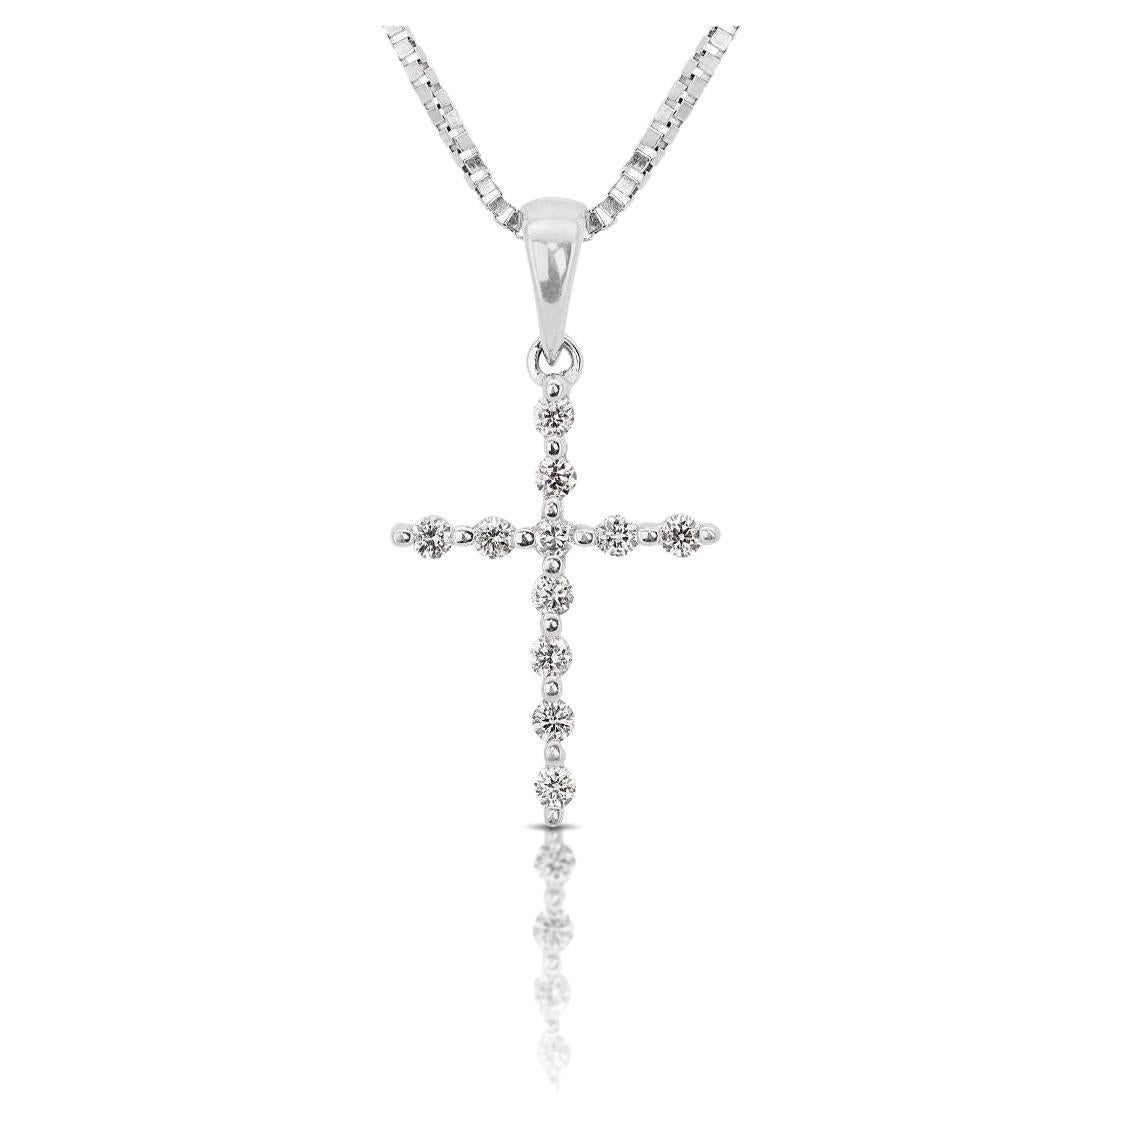 Glamorous 18k White Gold Necklace with 0.15 Natural Diamond For Sale